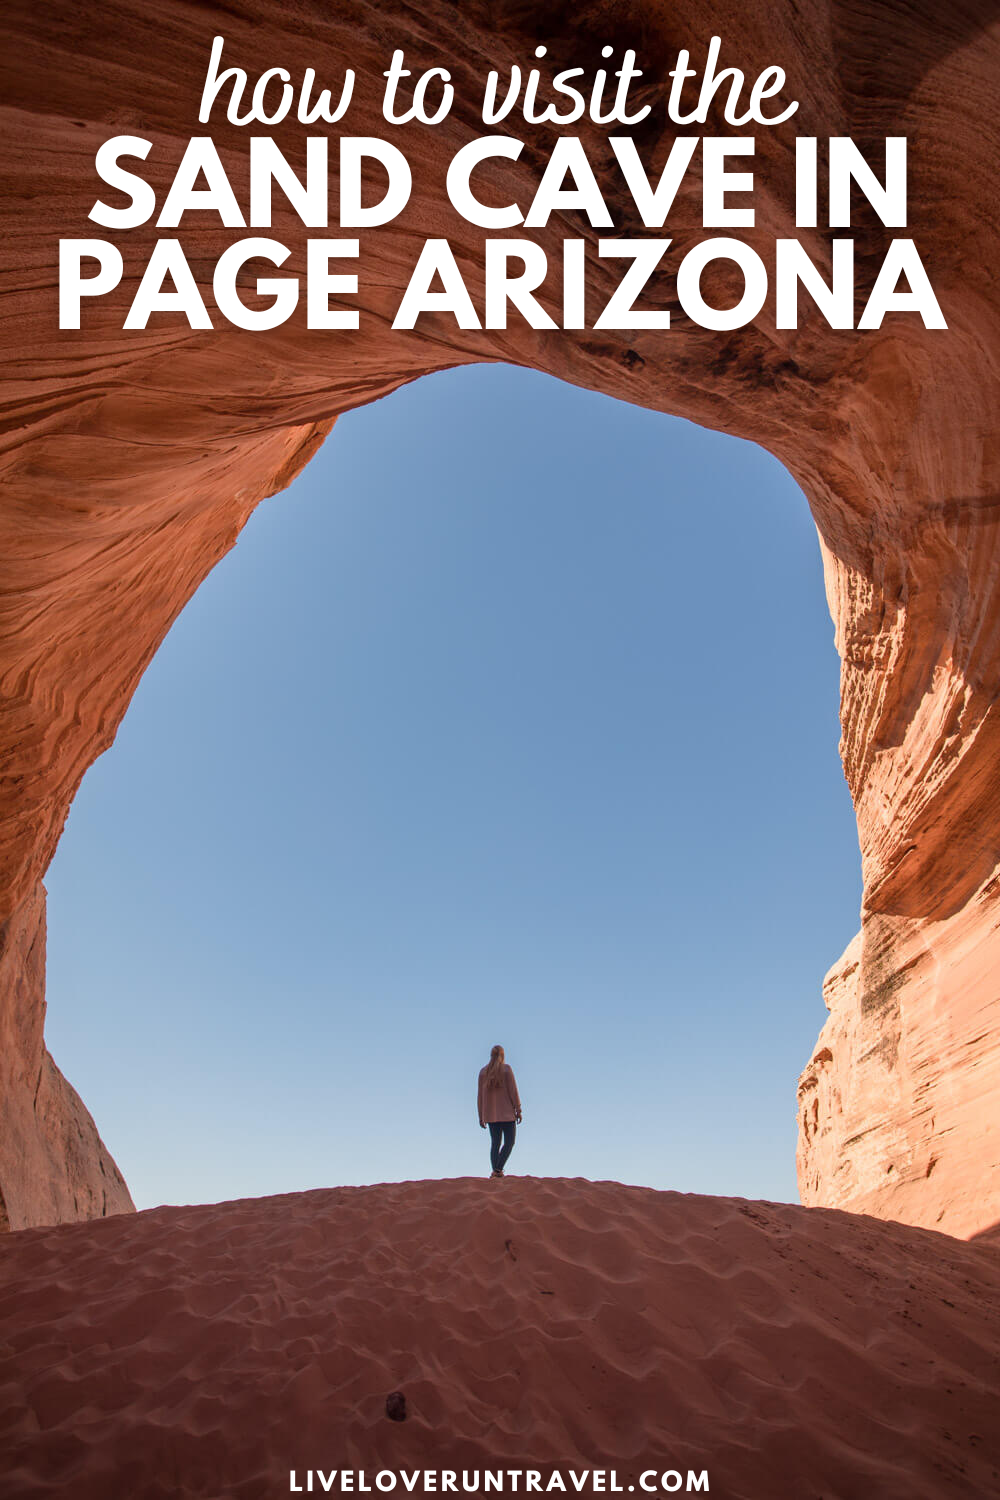 how to visit the big lake sand cave in page arizona pin with photo of a woman in the cave opening on top of a sand dune